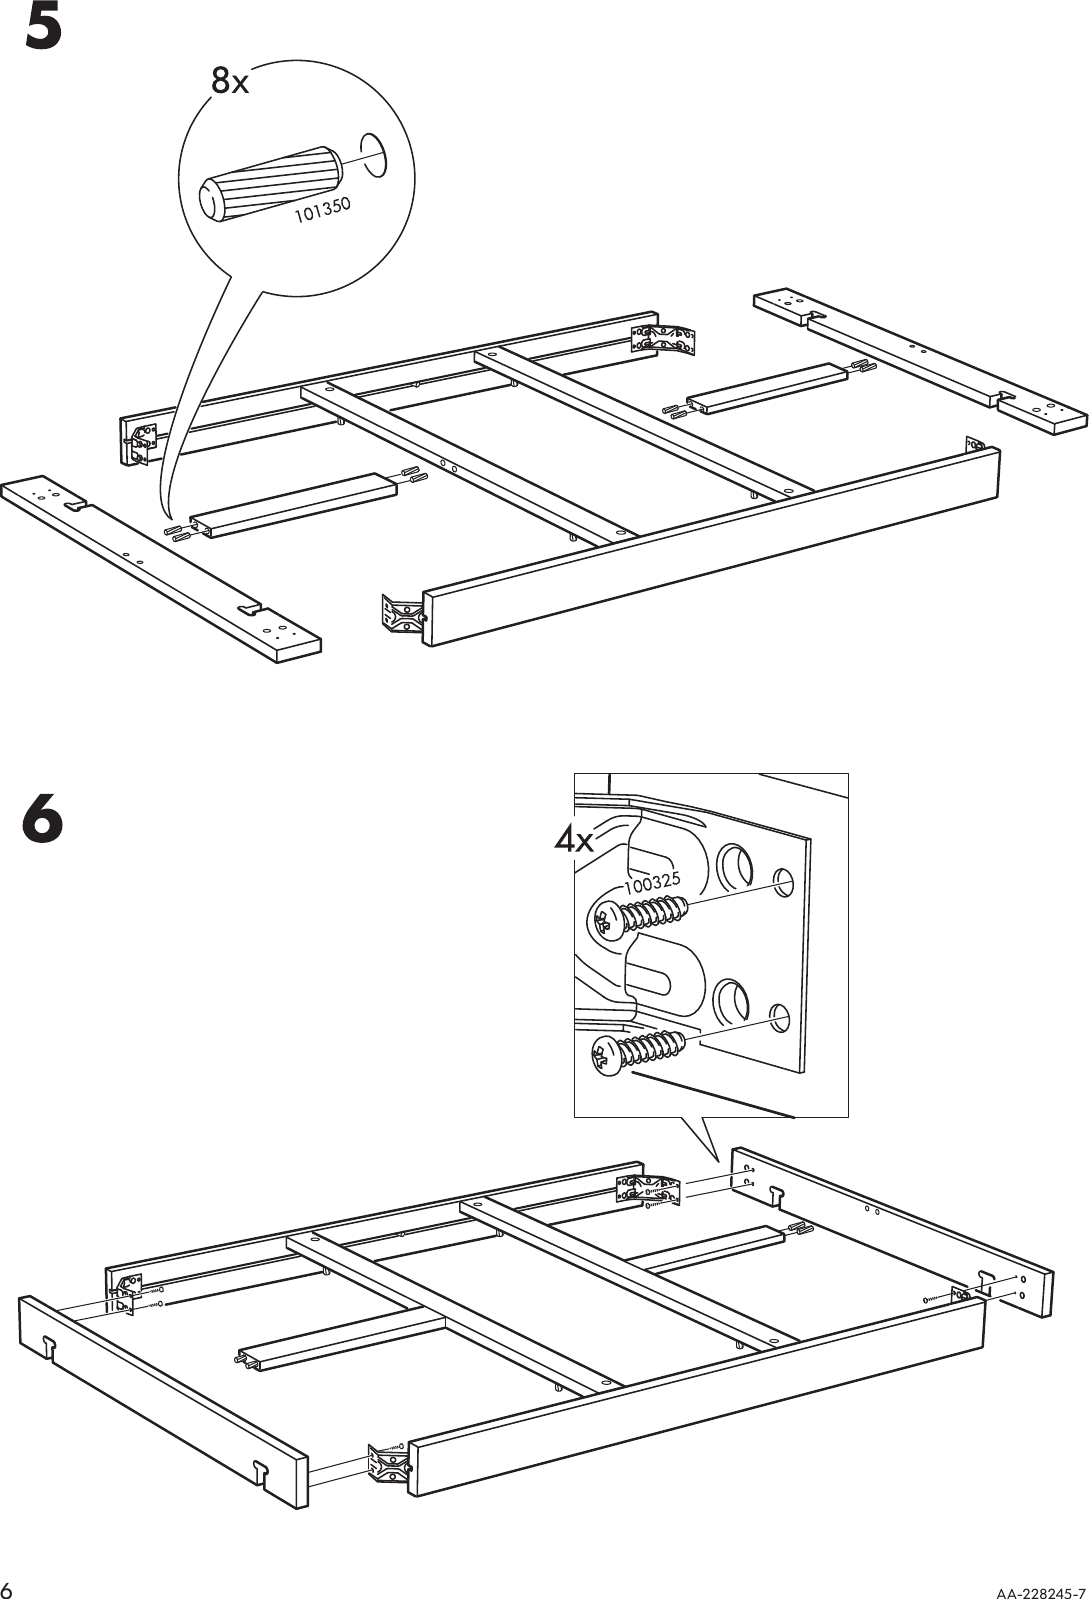 Page 6 of 12 - Ikea Ikea-Bjursta-Extendable-Dining-Table-69-86-102-X37-Assembly-Instruction